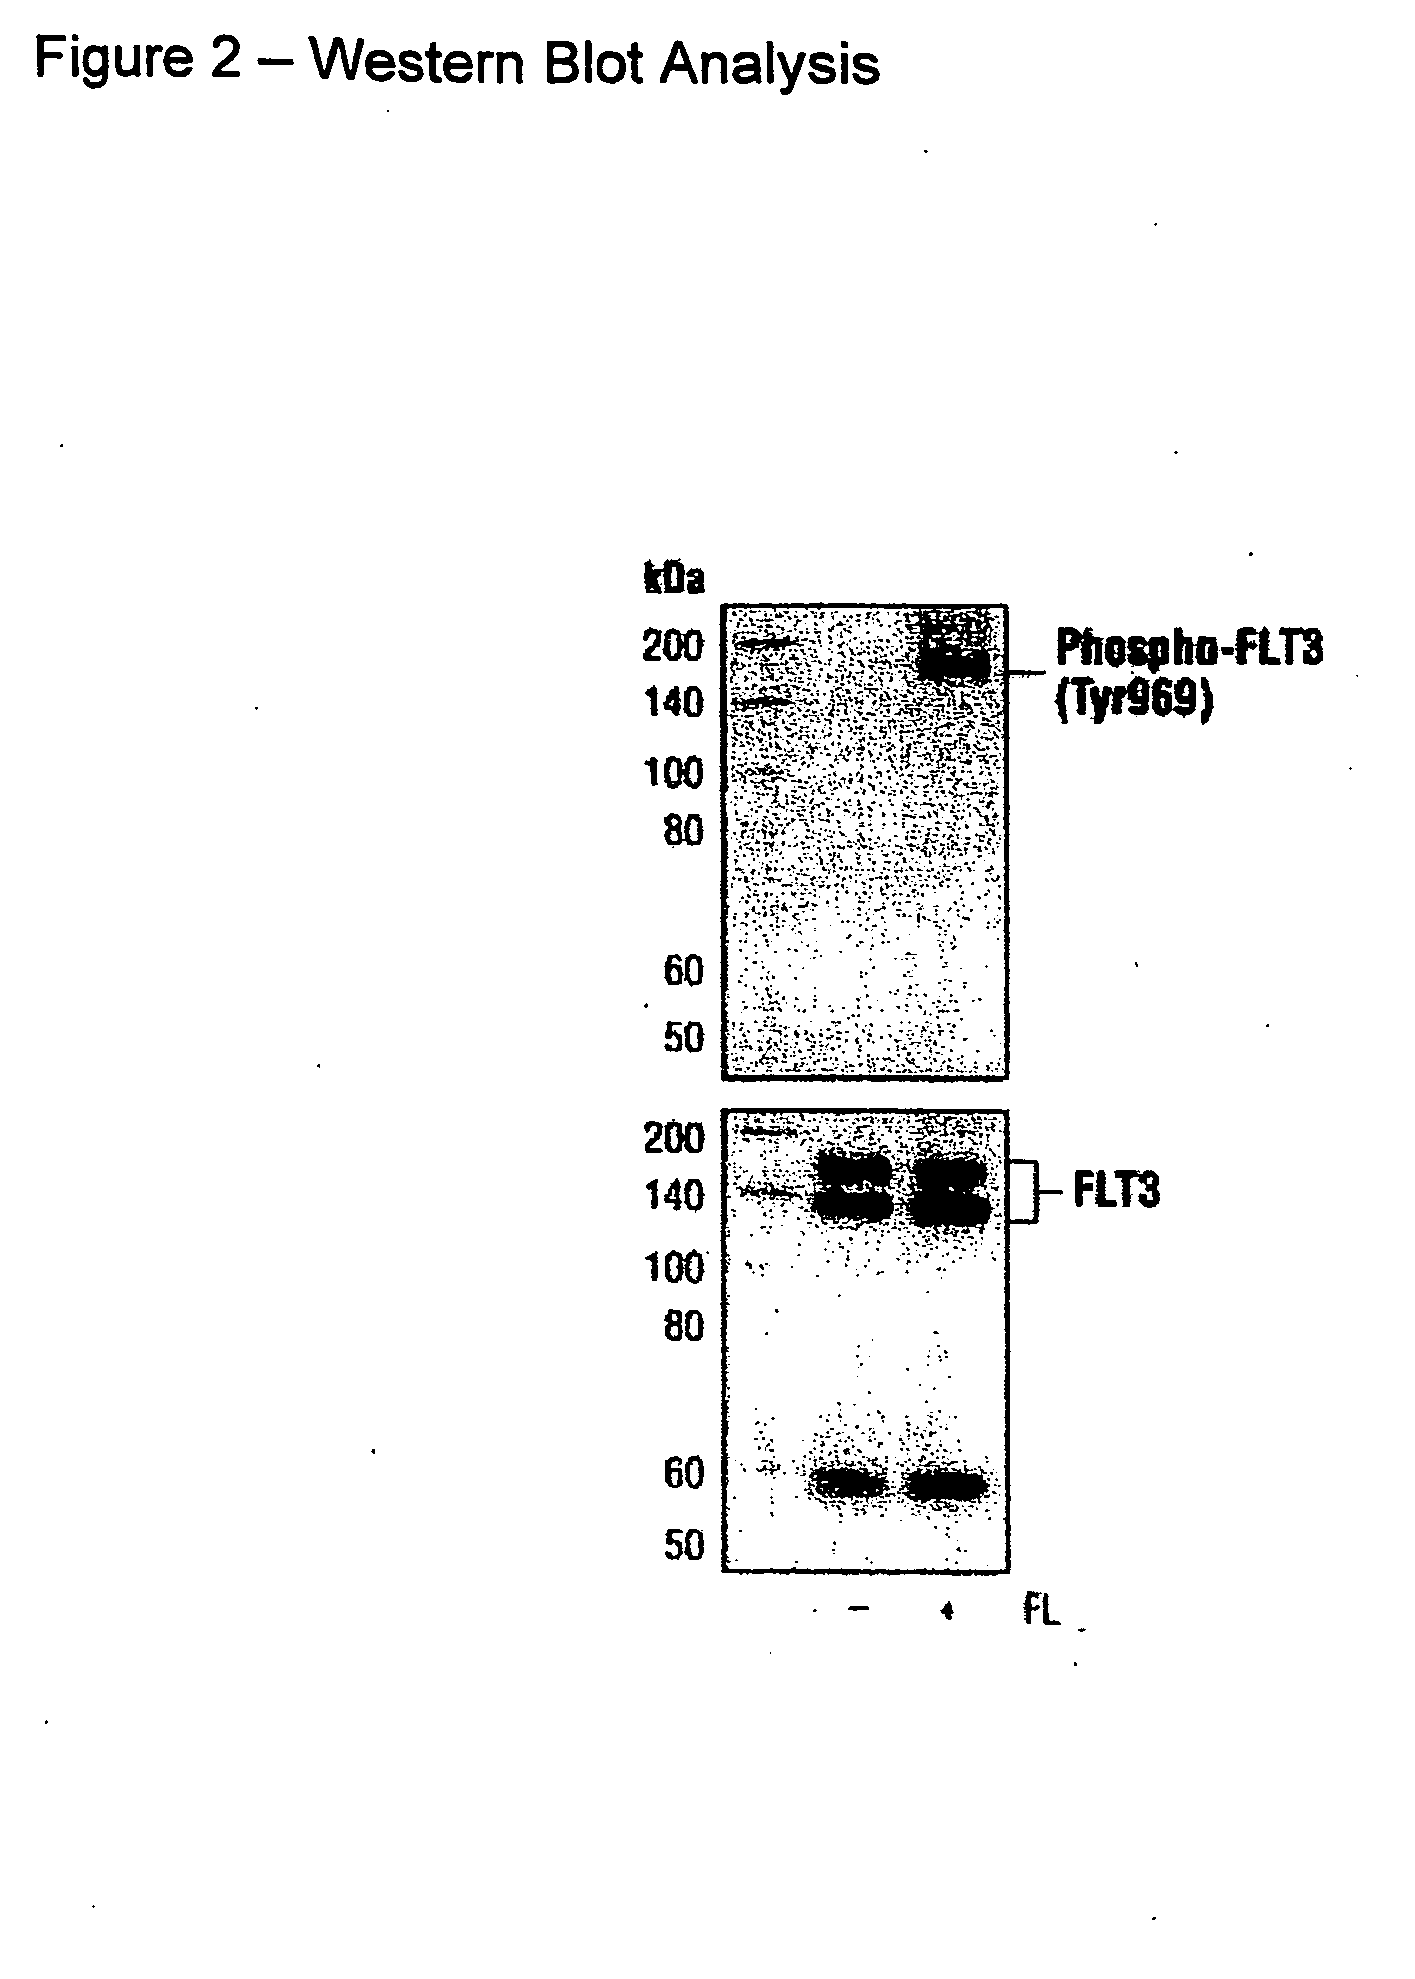 Phospho-specific antibodies to flt3 (tyr969) and uses thereof